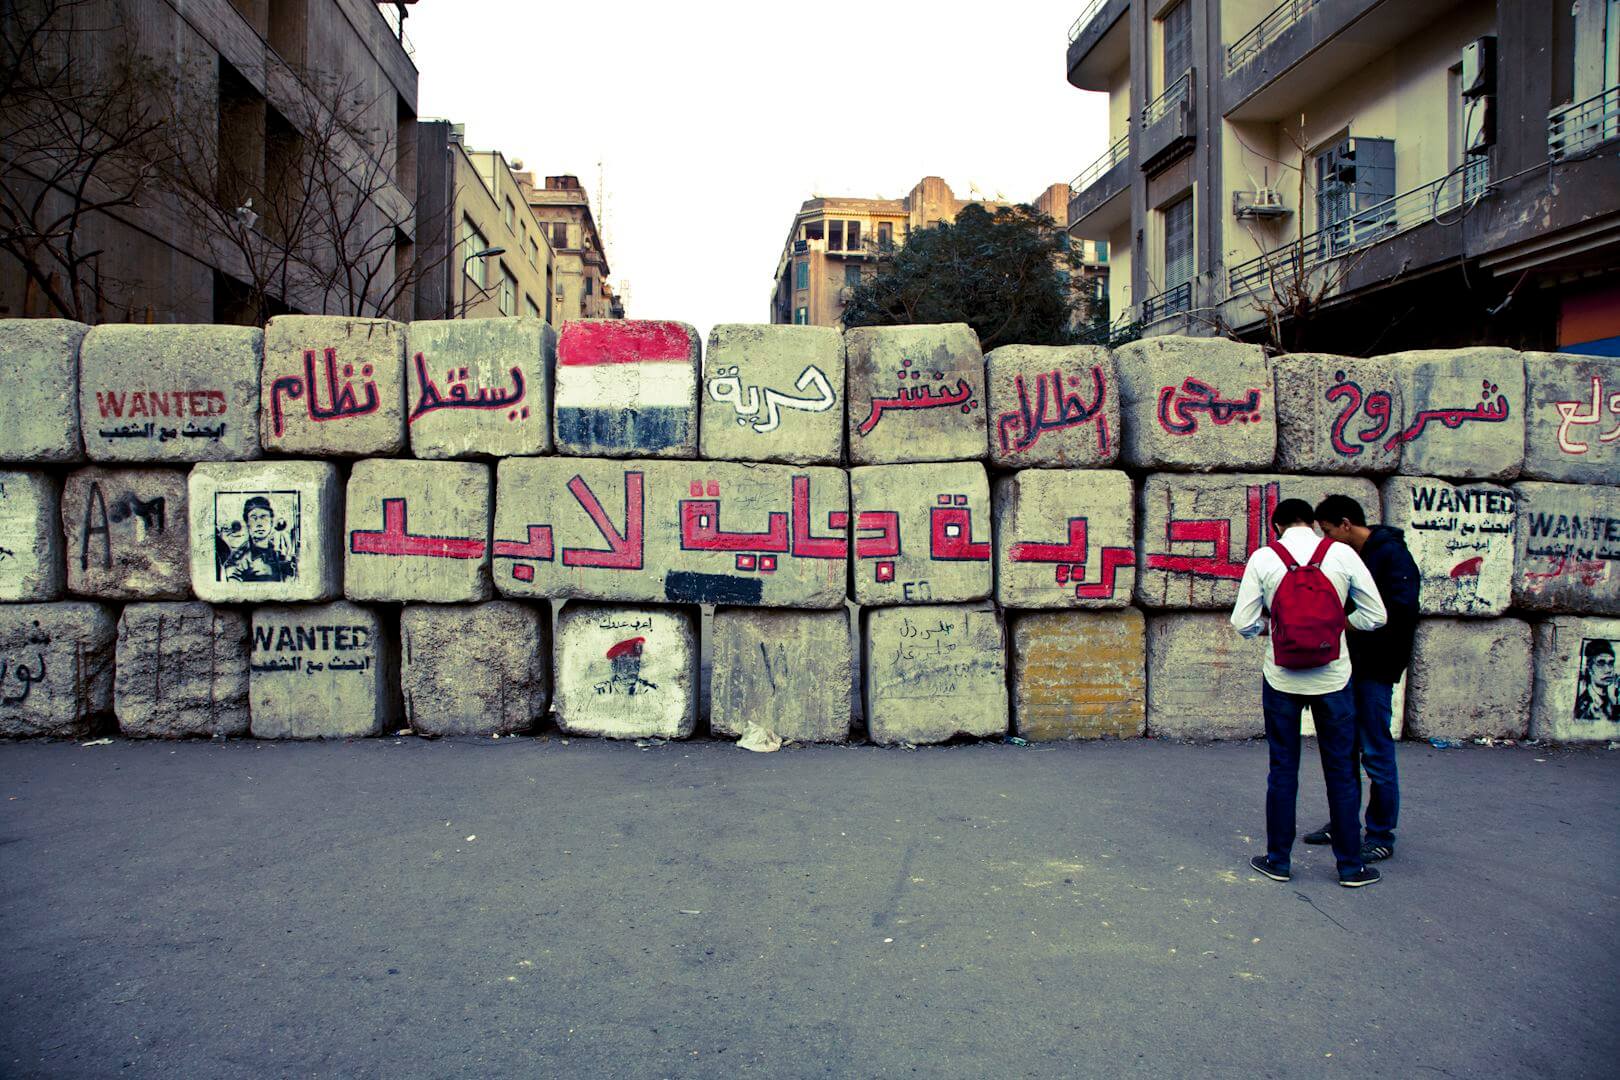 Large stacked blocks forming a wall covered in spray painted Arabic text. Two people are standing to the right. Residential buildings stand behind the wall.